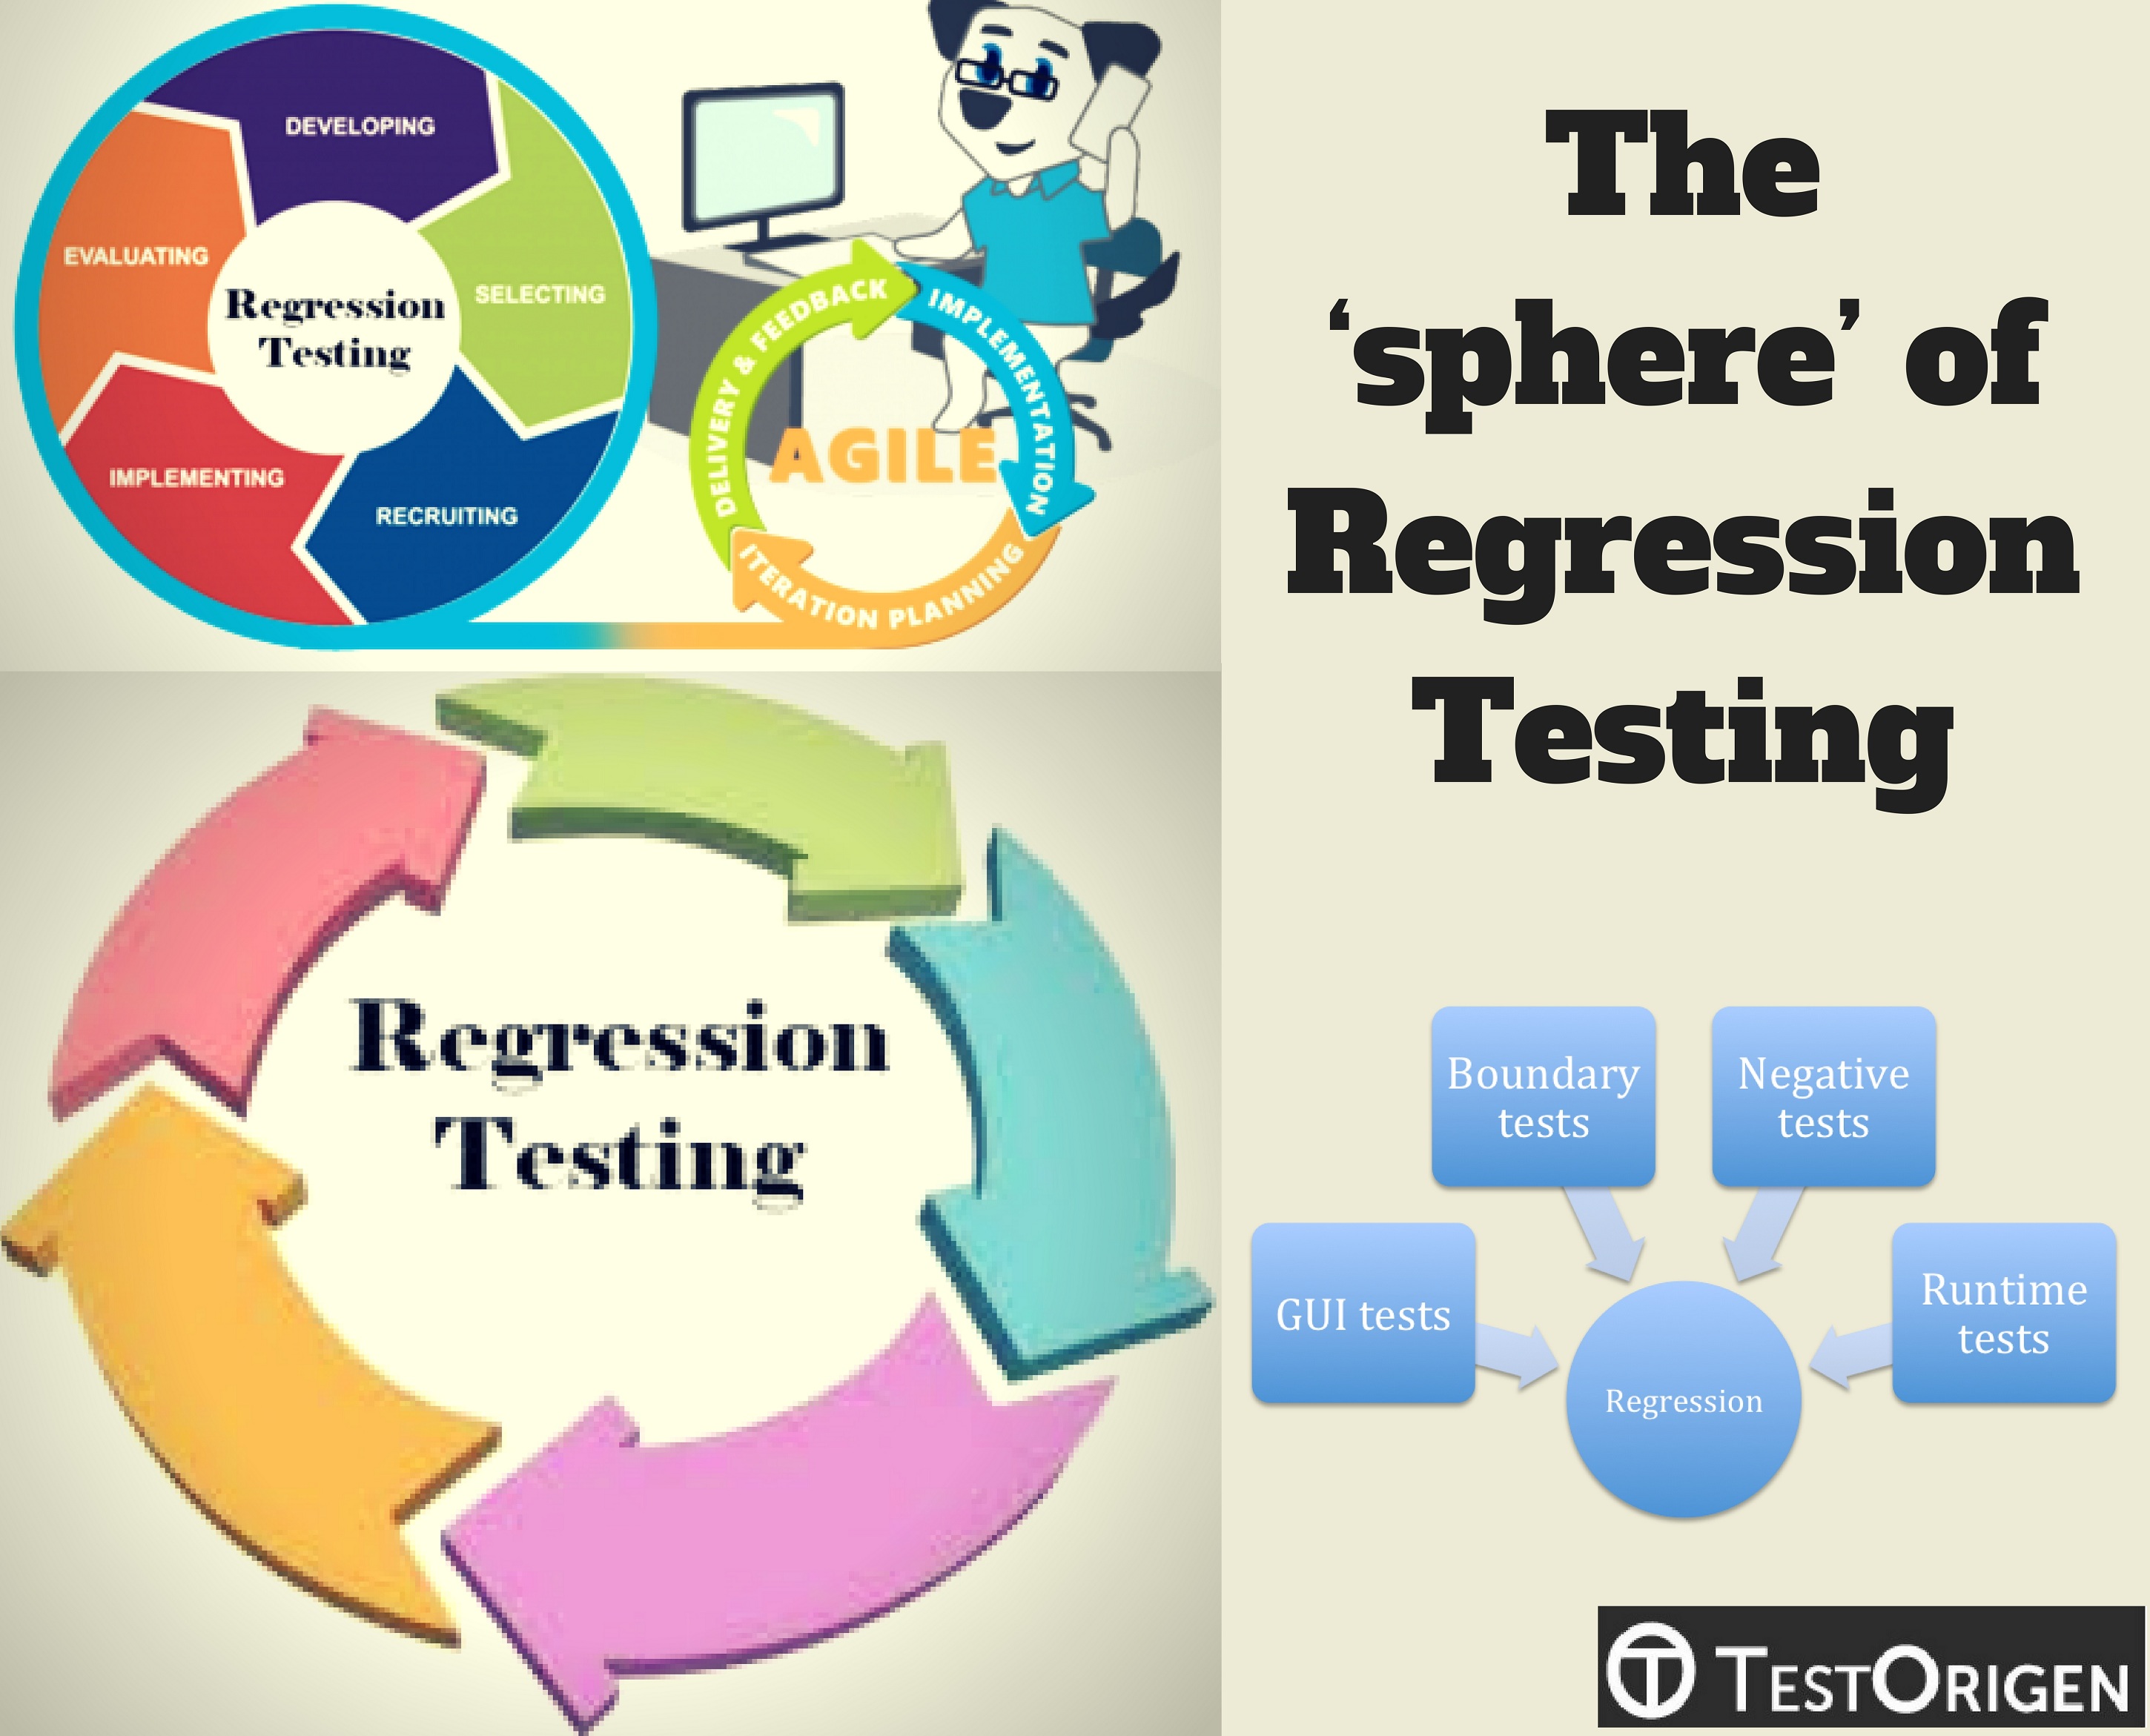 The ‘sphere’ of Regression Testing